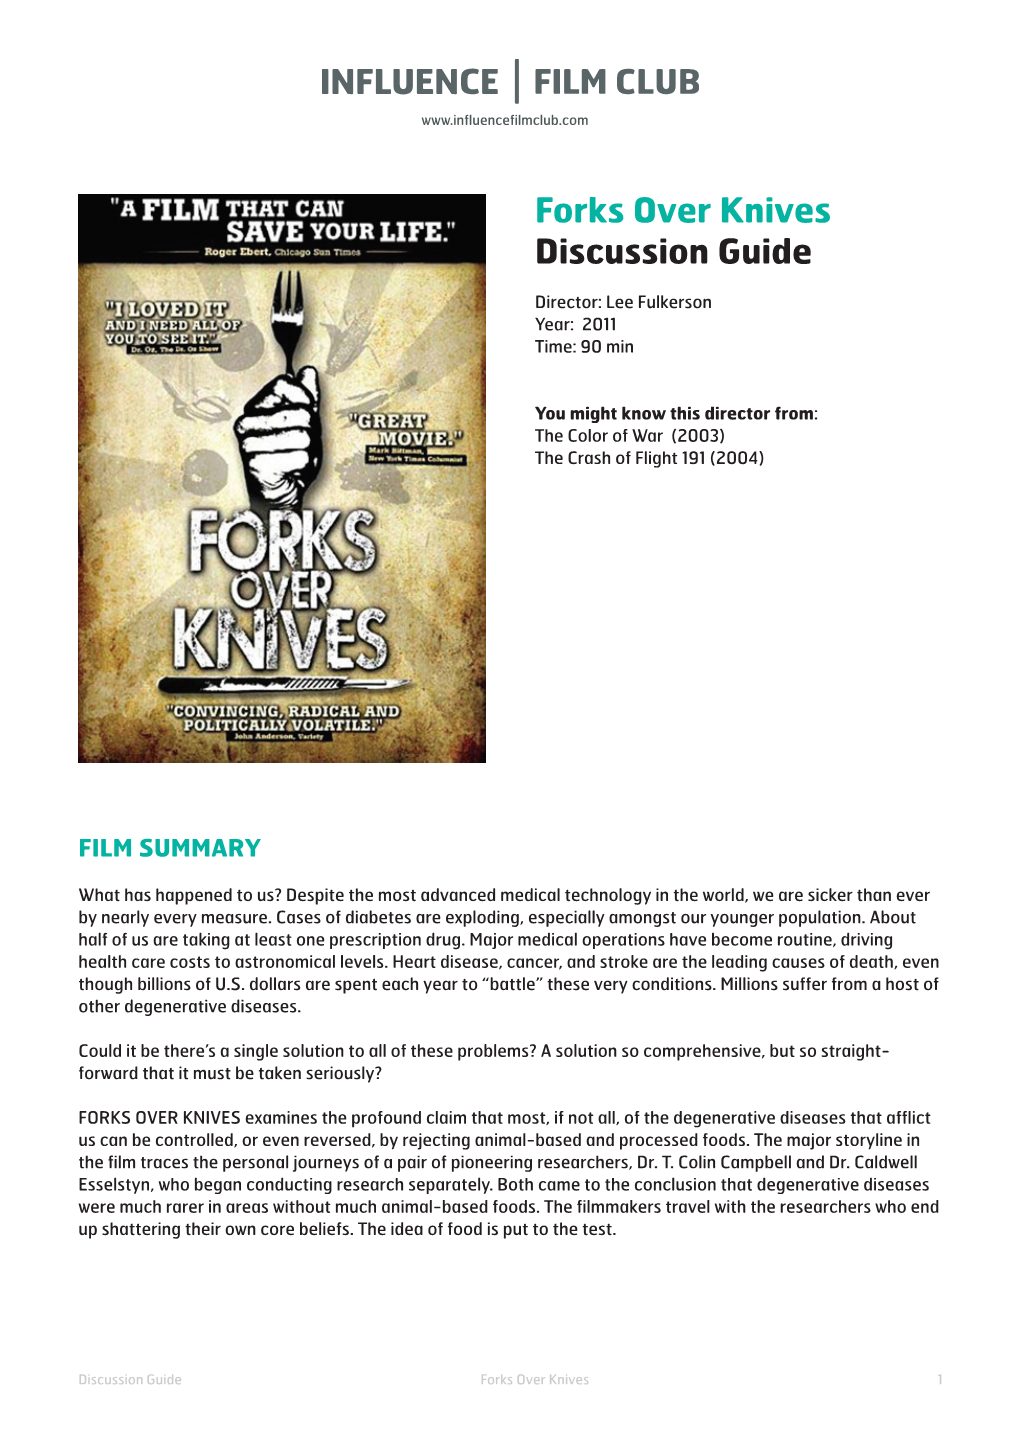 Forks Over Knives Discussion Guide